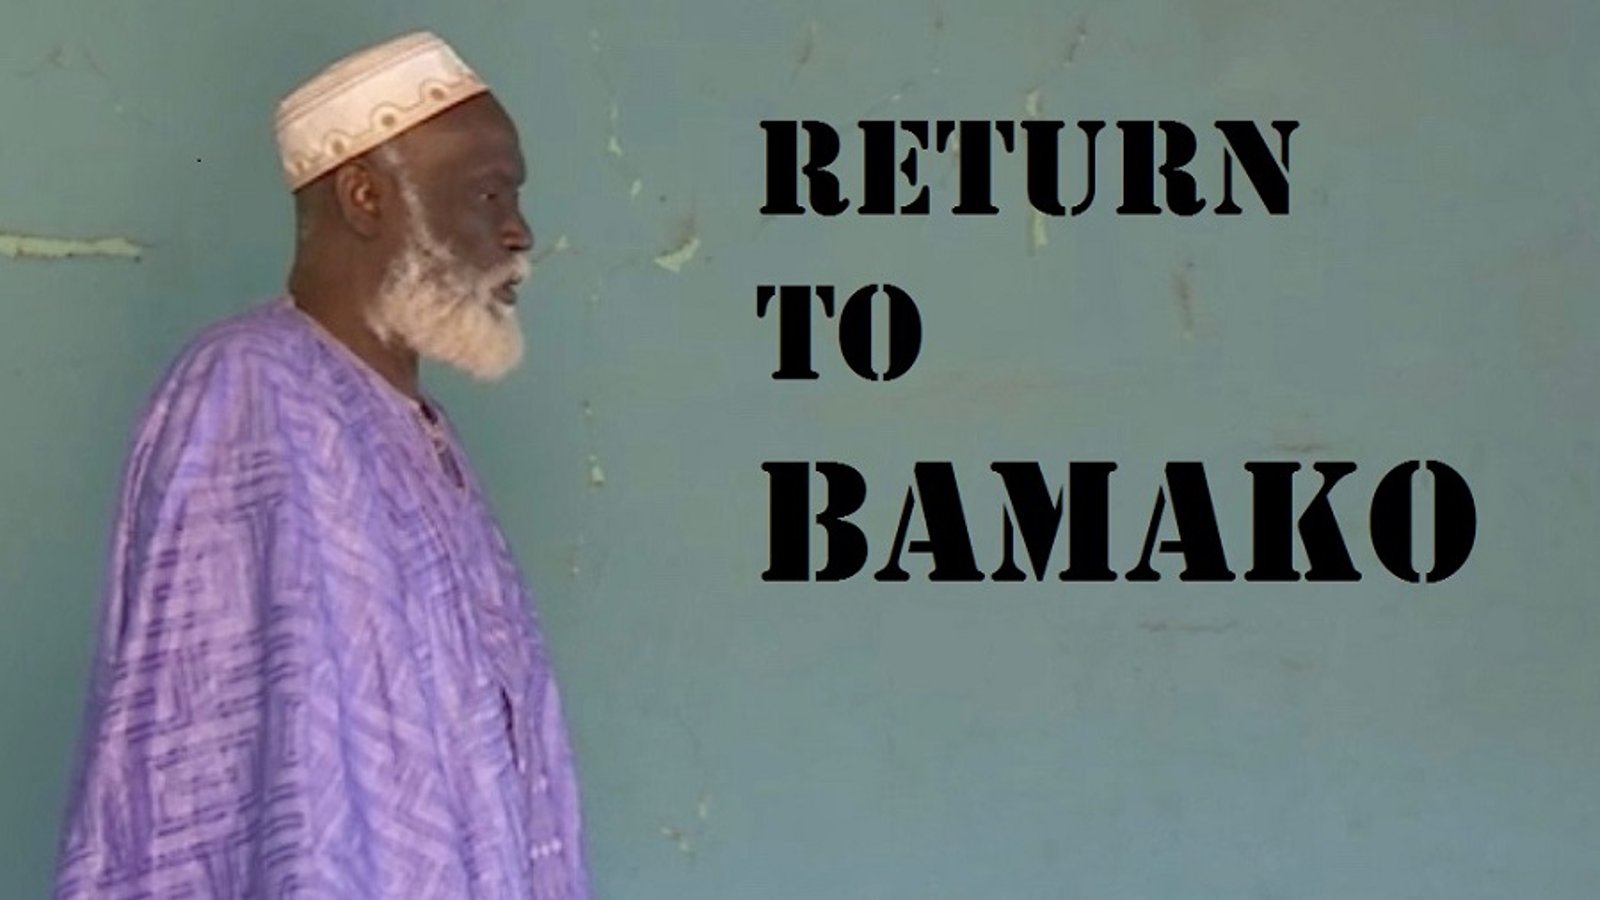 Return to Bamako - The Birth of Extremist Movements in Africa